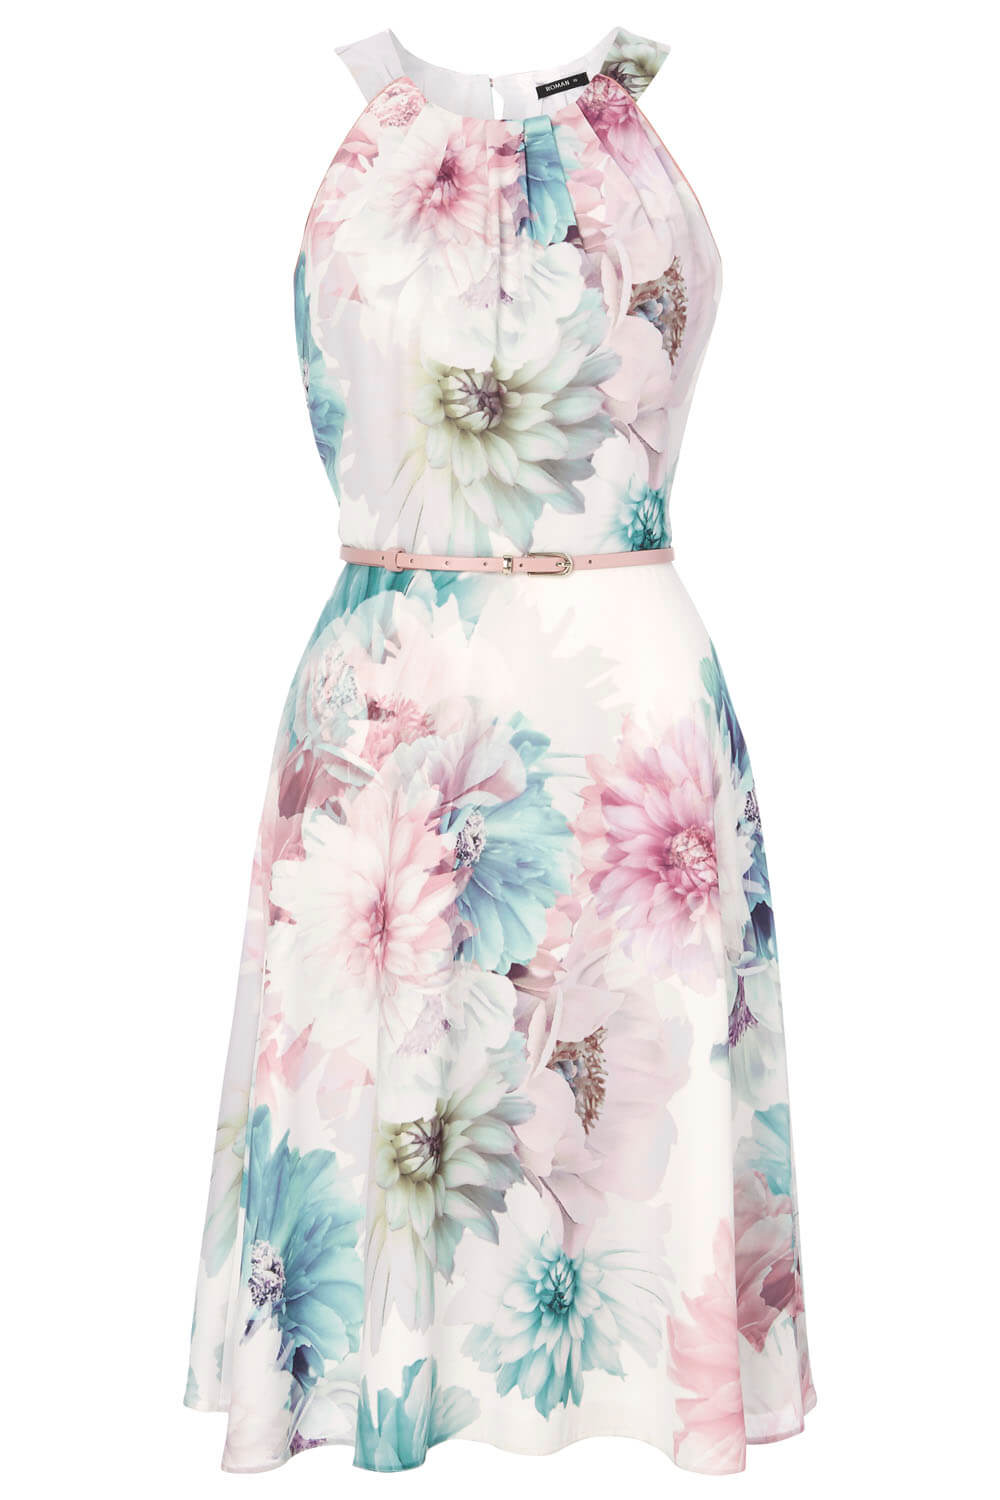 Ivory  Floral Fit and Flare Belted Dress, Image 5 of 5